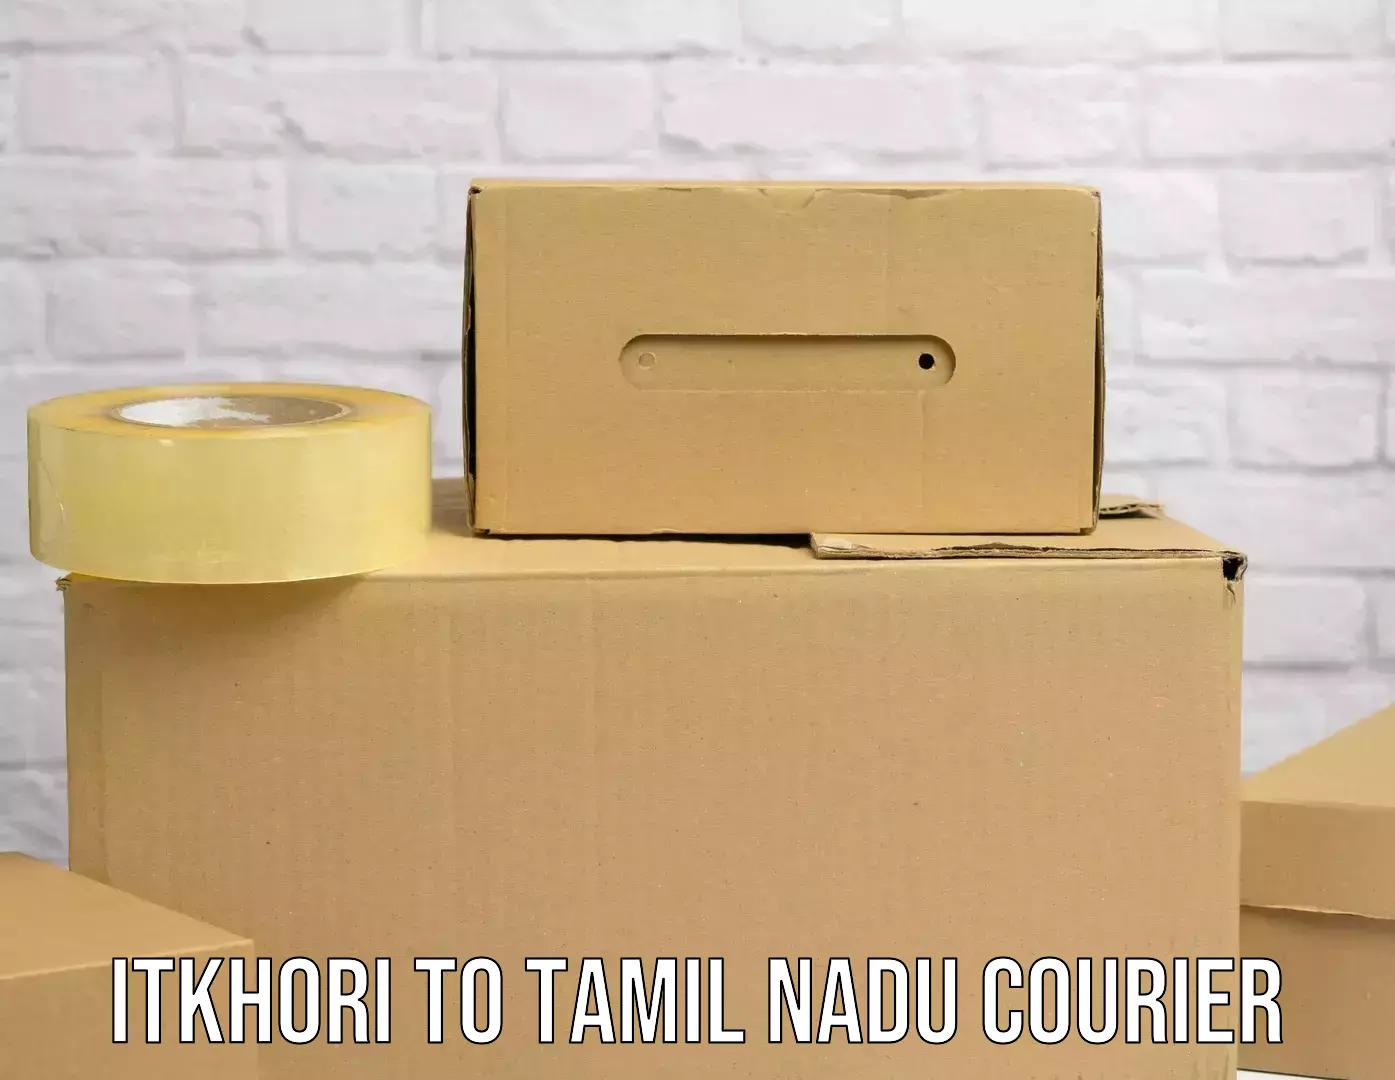 On-time delivery services Itkhori to Tamil Nadu